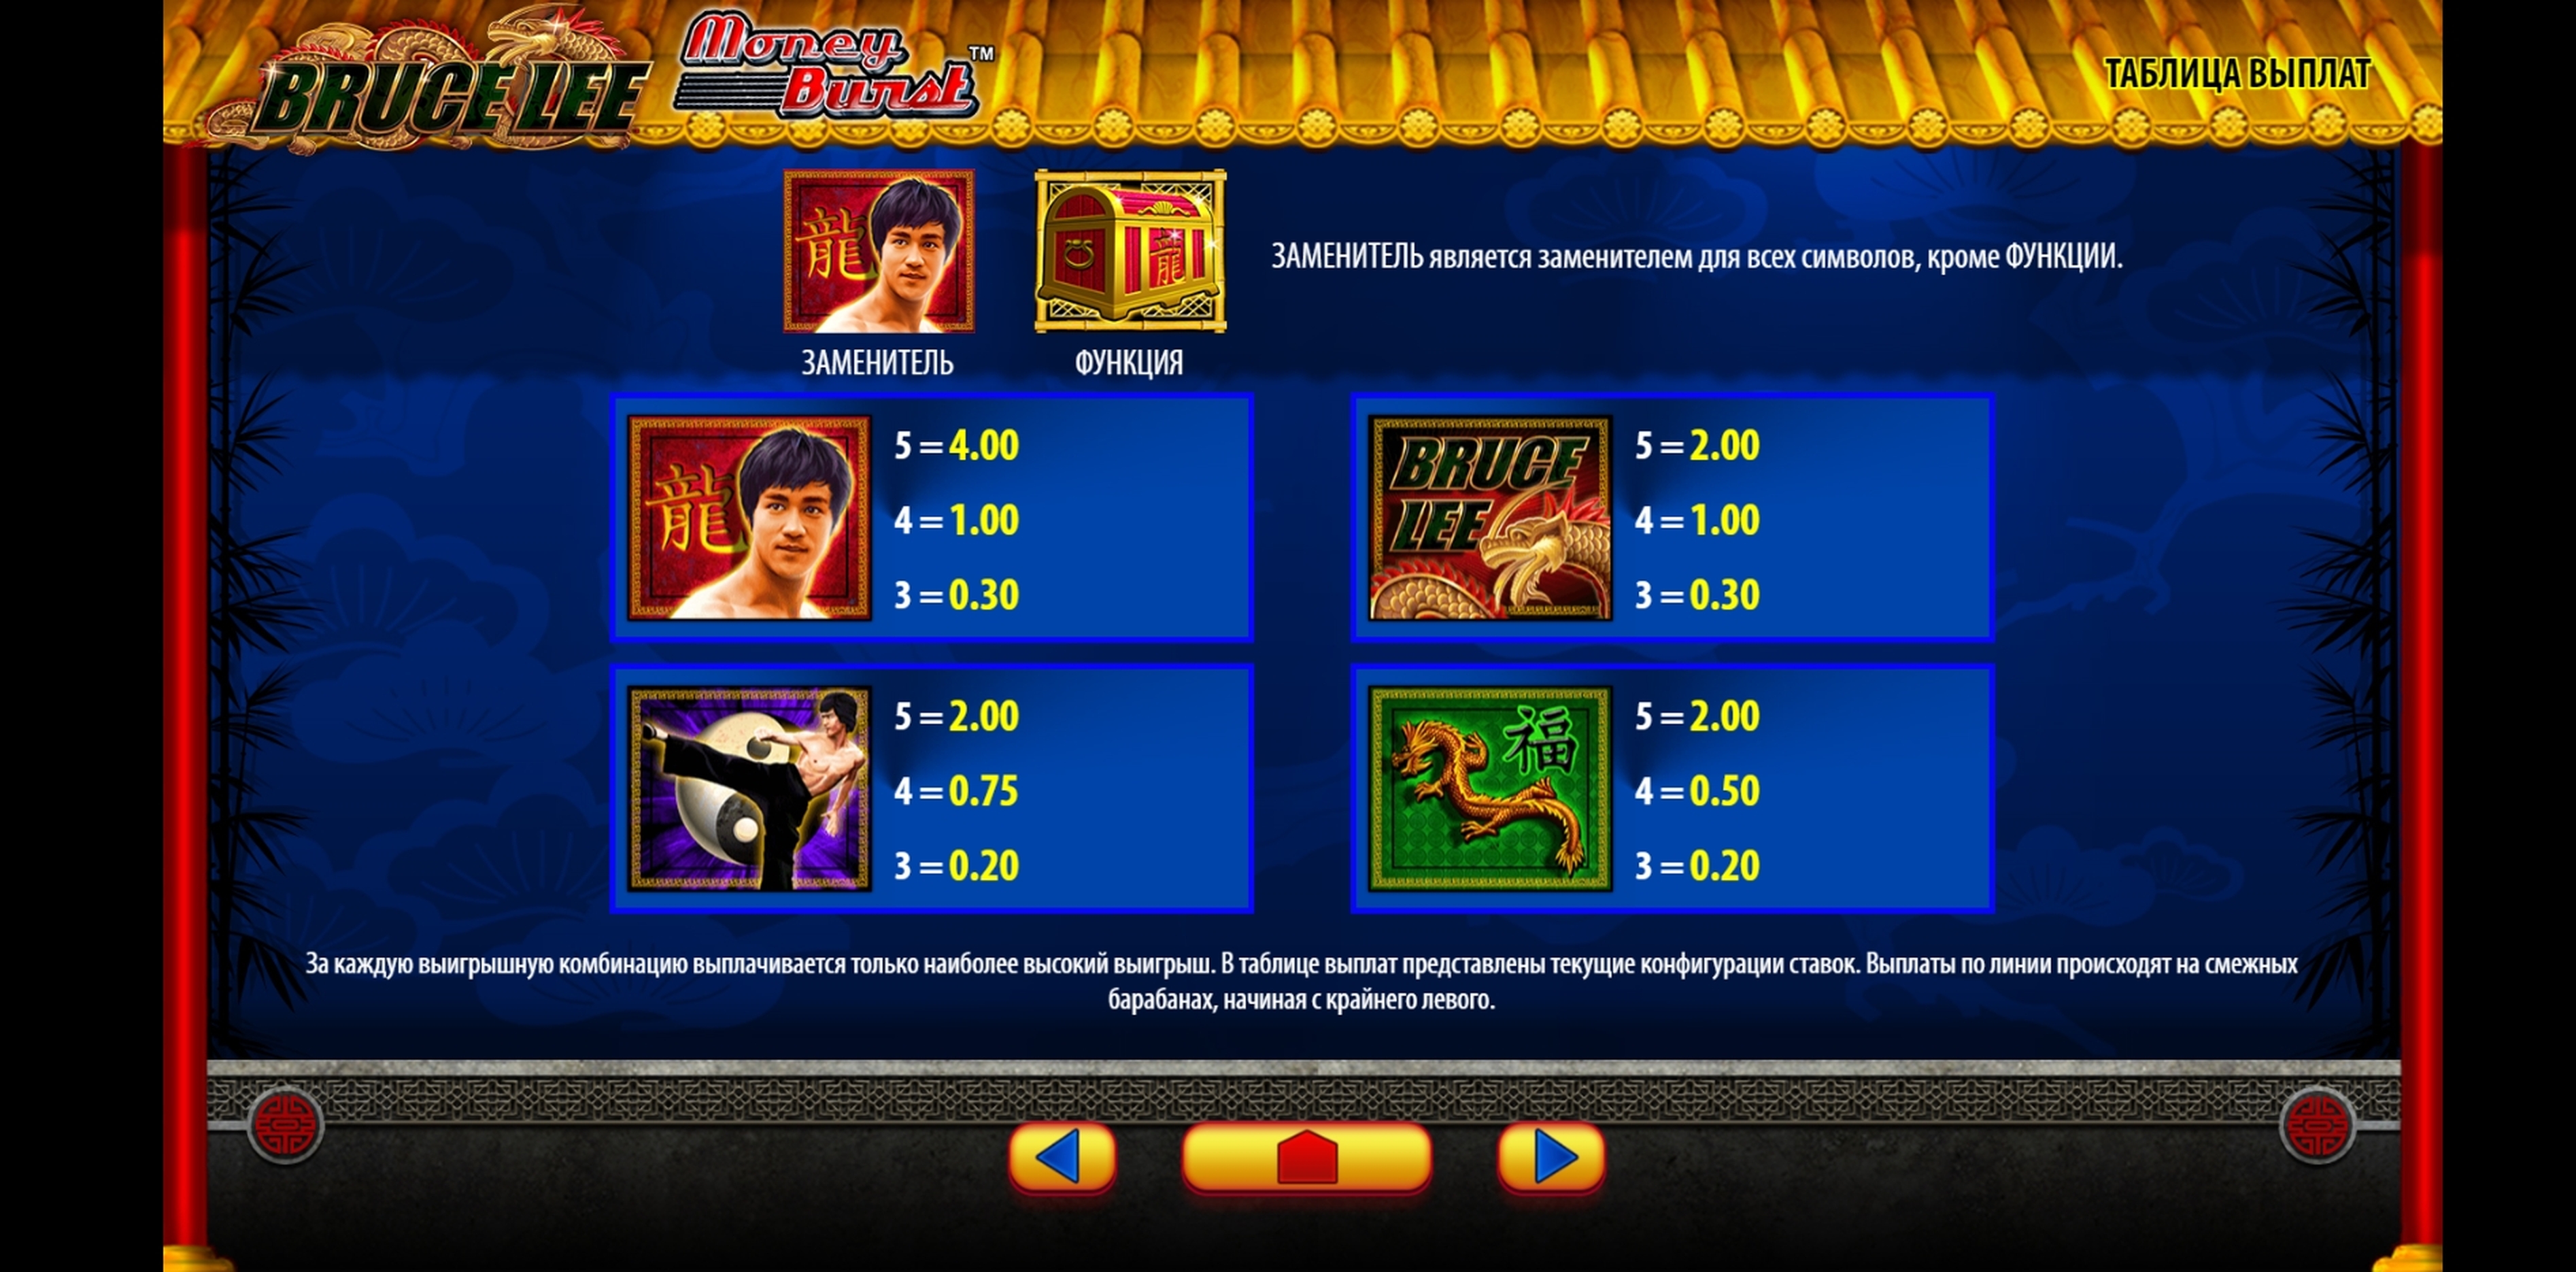 Info of Bruce Lee Slot Game by WMS